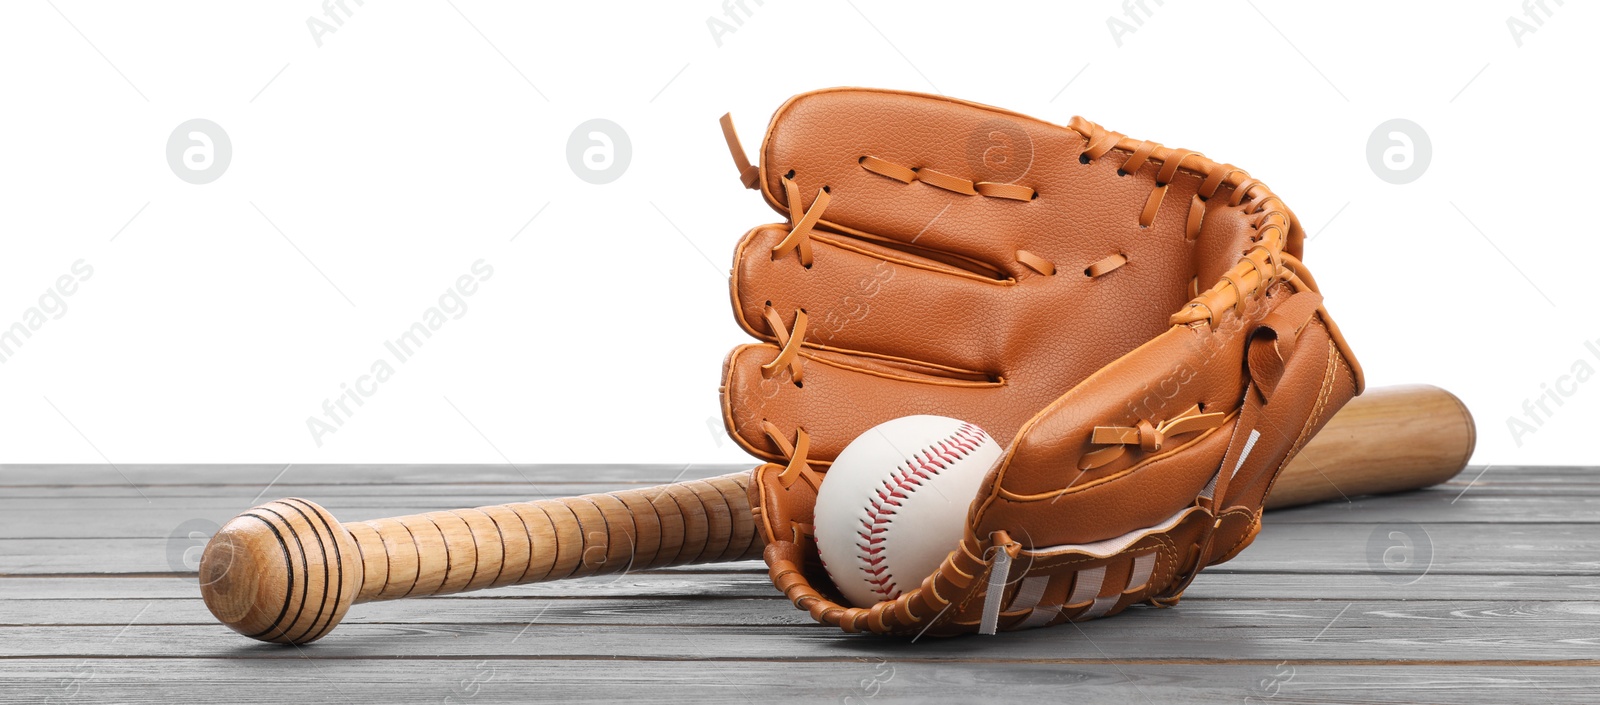 Photo of Baseball bat, ball and catcher's mitt on grey wooden table against white background